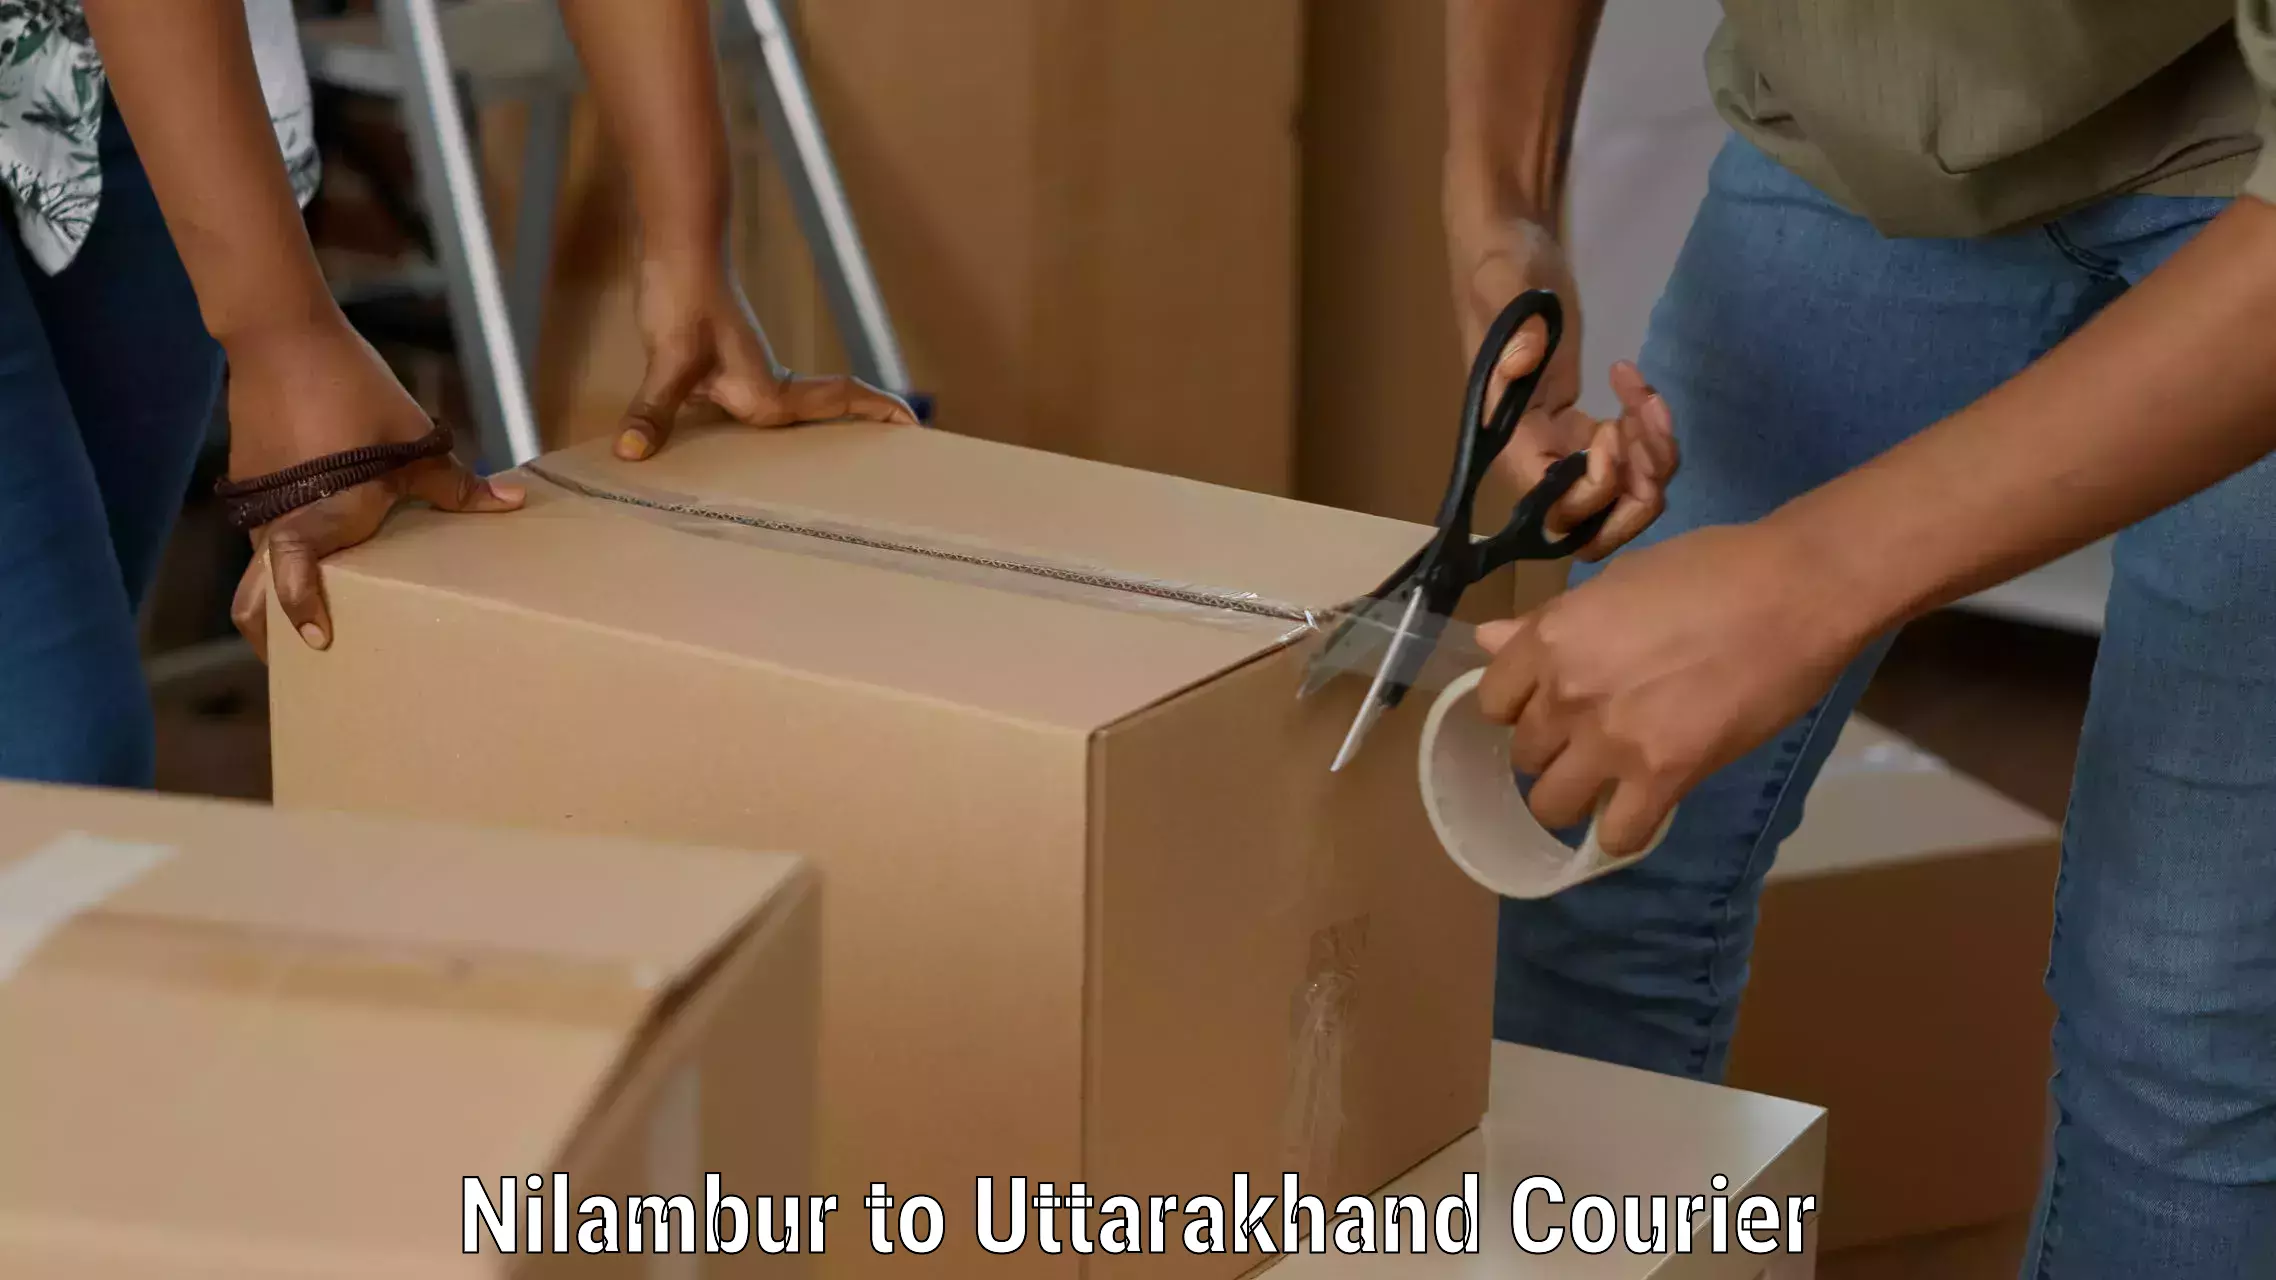 On-call courier service Nilambur to Tehri Garhwal